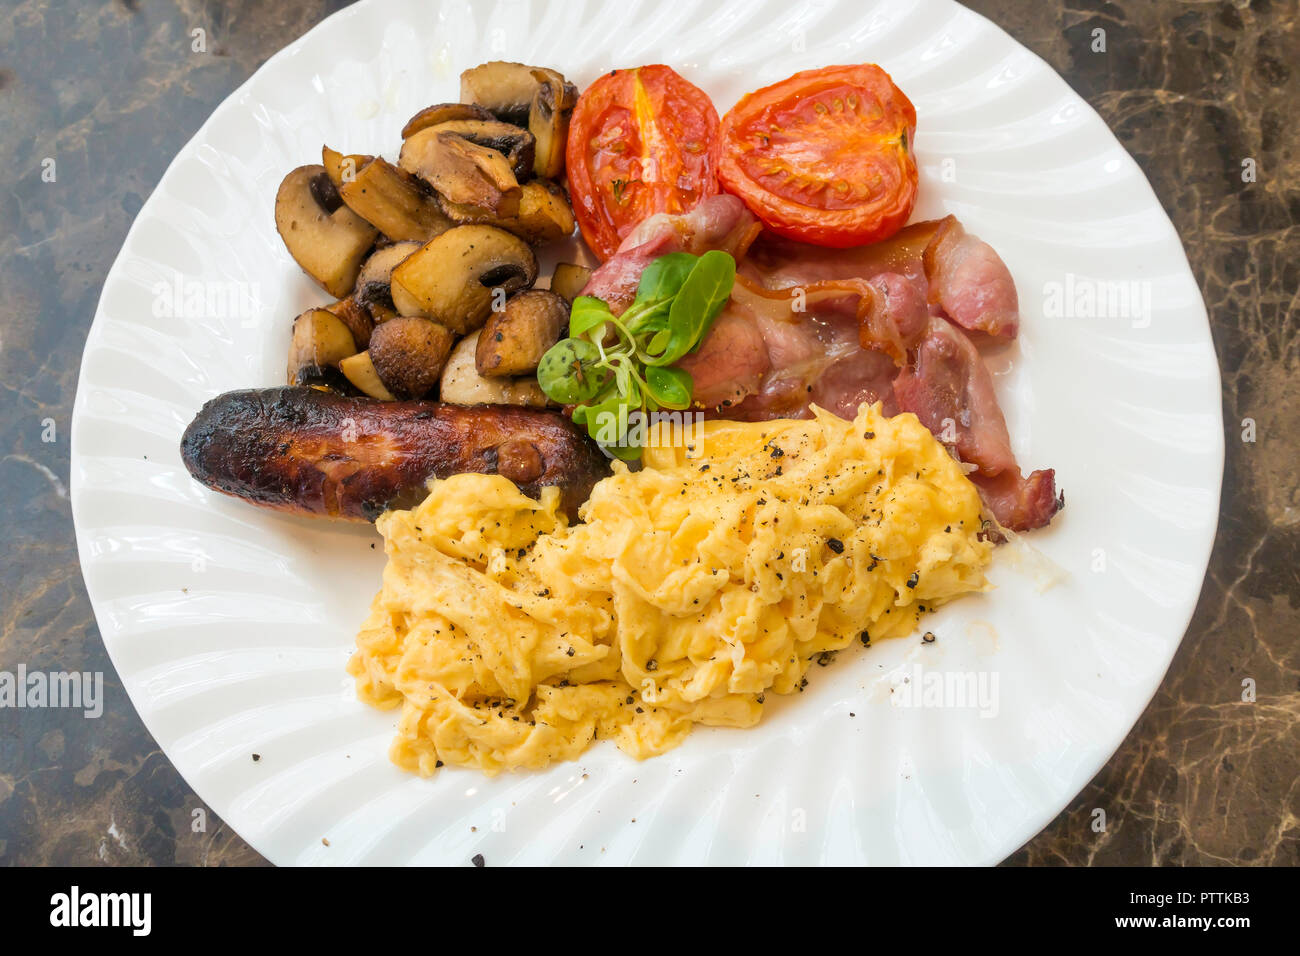 Cafe meal an English Breakfast bacon scrambled egg sausage and fried tomato and mushrooms served in Yorkshire Stock Photo